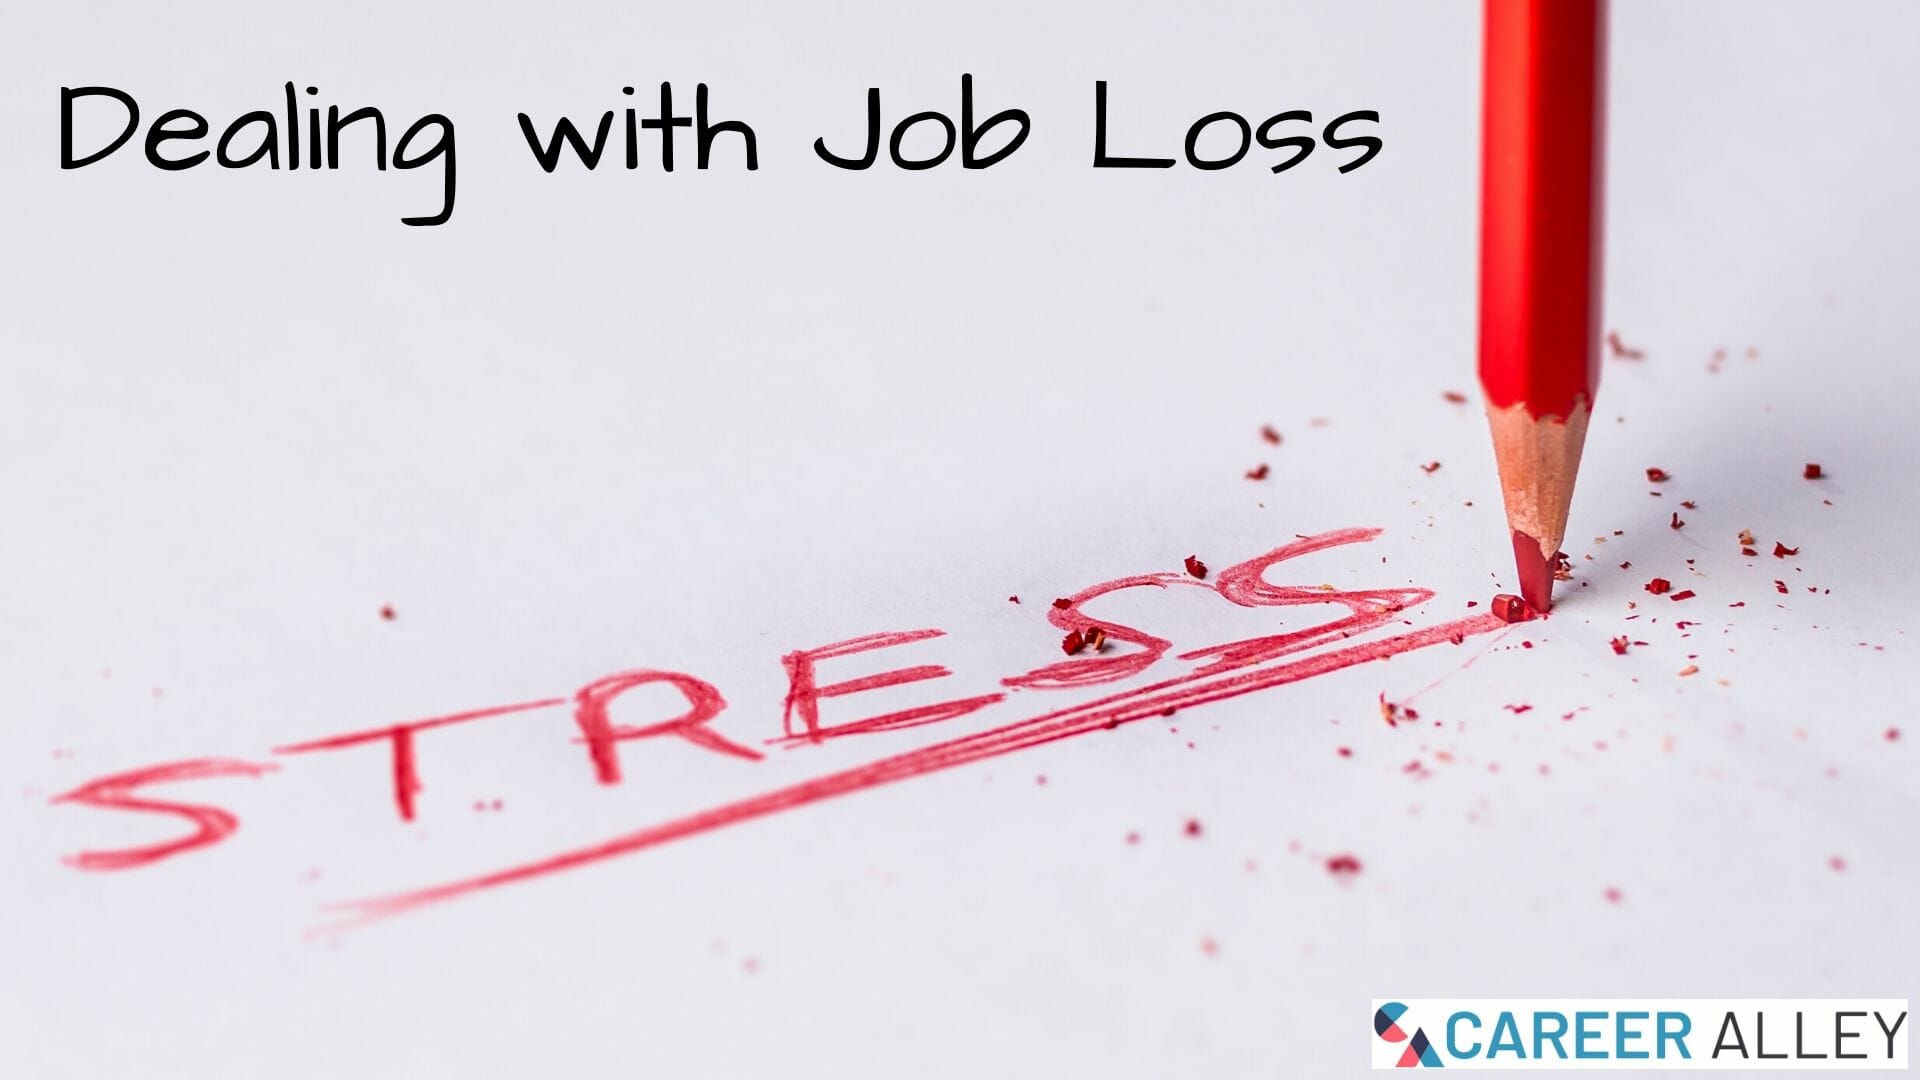 Dealing with Job Loss